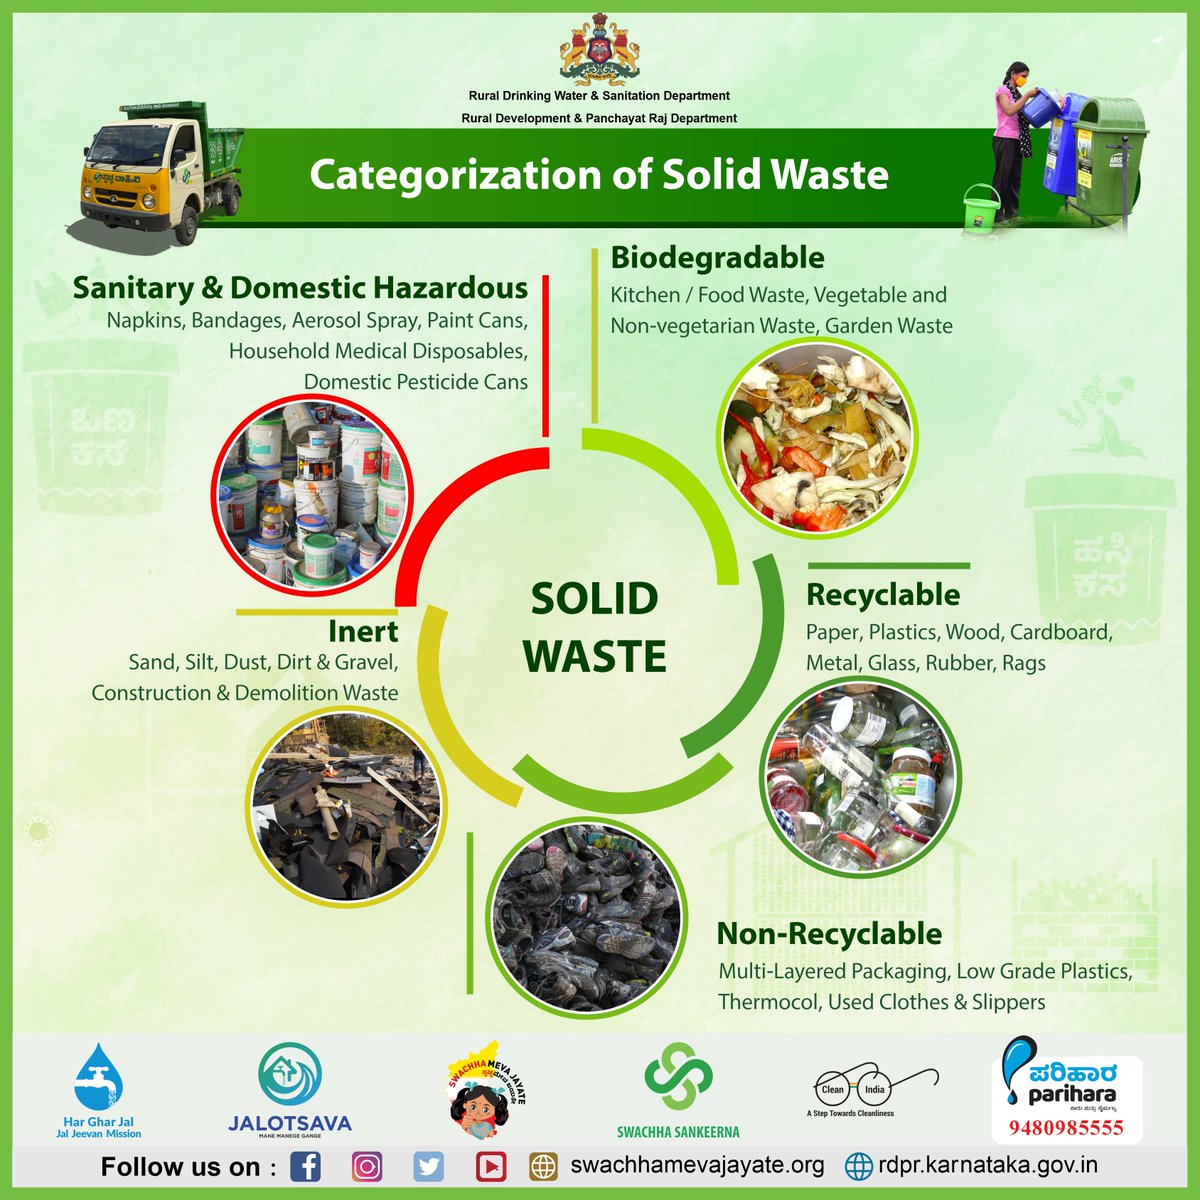 Solid waste can be classified into several types. Here are the 5 major types of Solid Waste 

#RDWSD #SolidWaste #SolidWasteManagement #SWM #Biodegradable #SanitaryWaste #DomesticHazardous #KitchenWaste #FoodWaste #PlasticWaste #ConstructionWaste #DemolitionWaste #RecyclableWaste